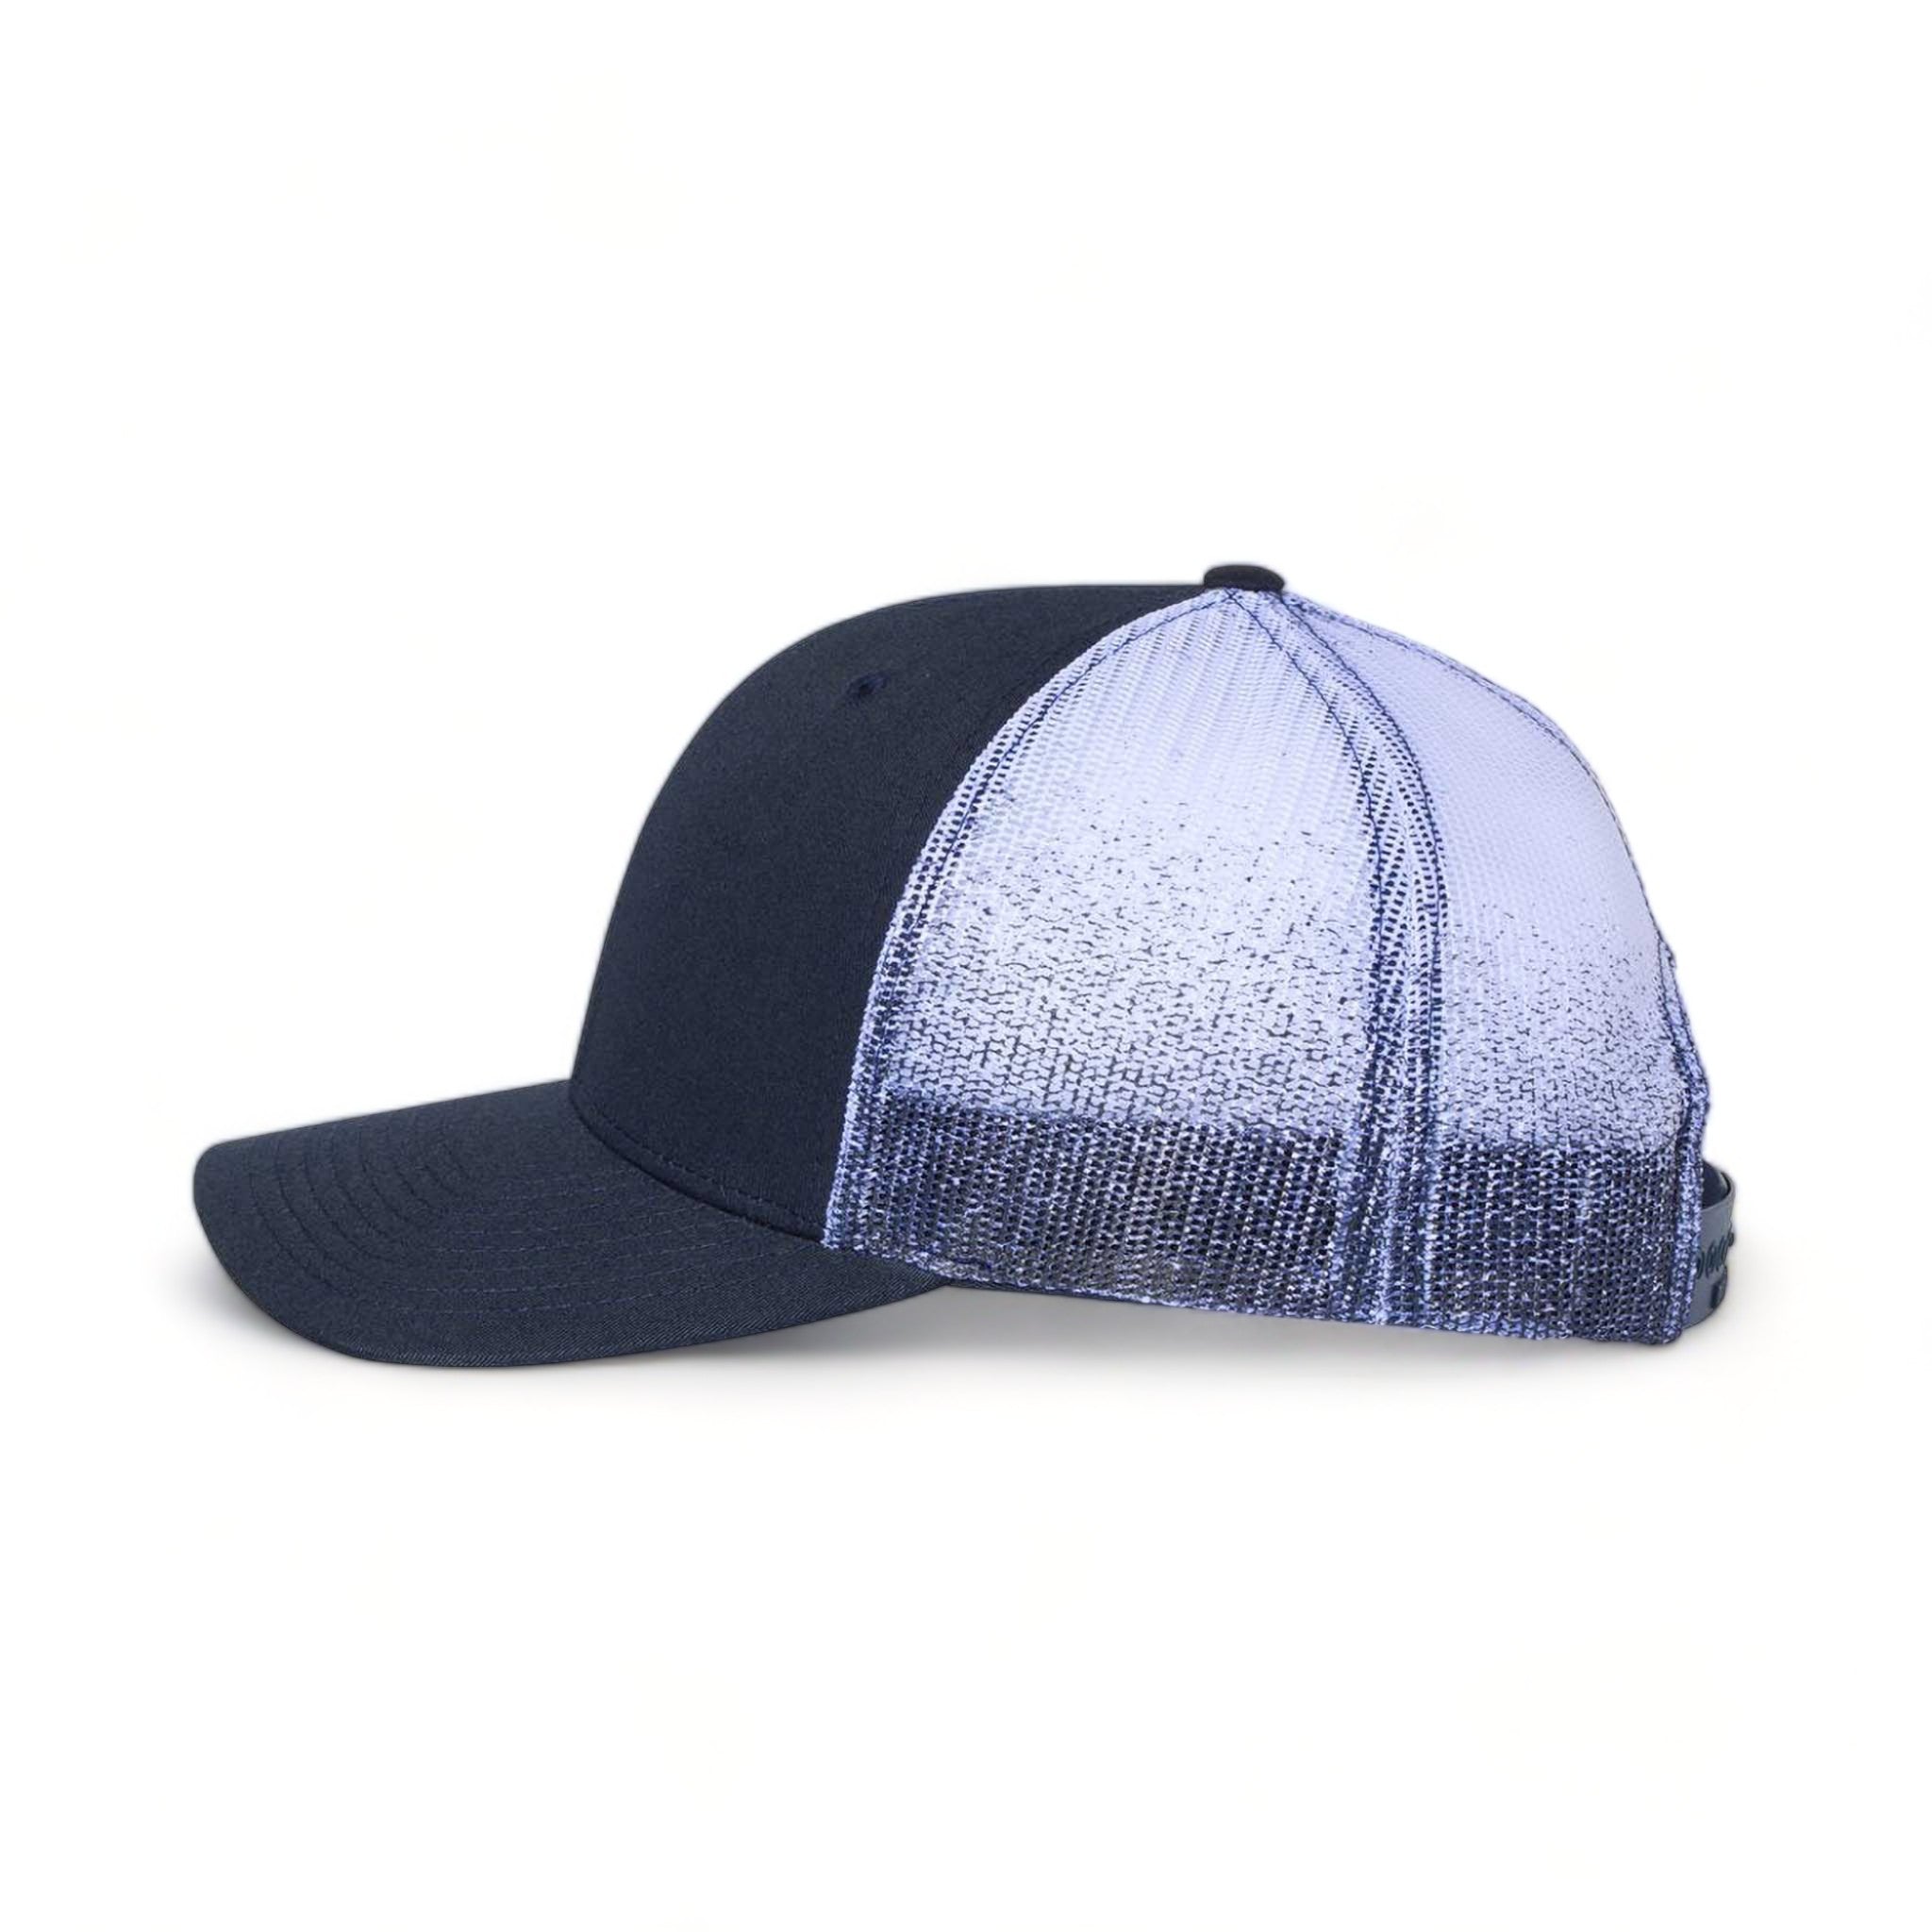 Side view of Richardson 112PM custom hat in navy and navy to white fade